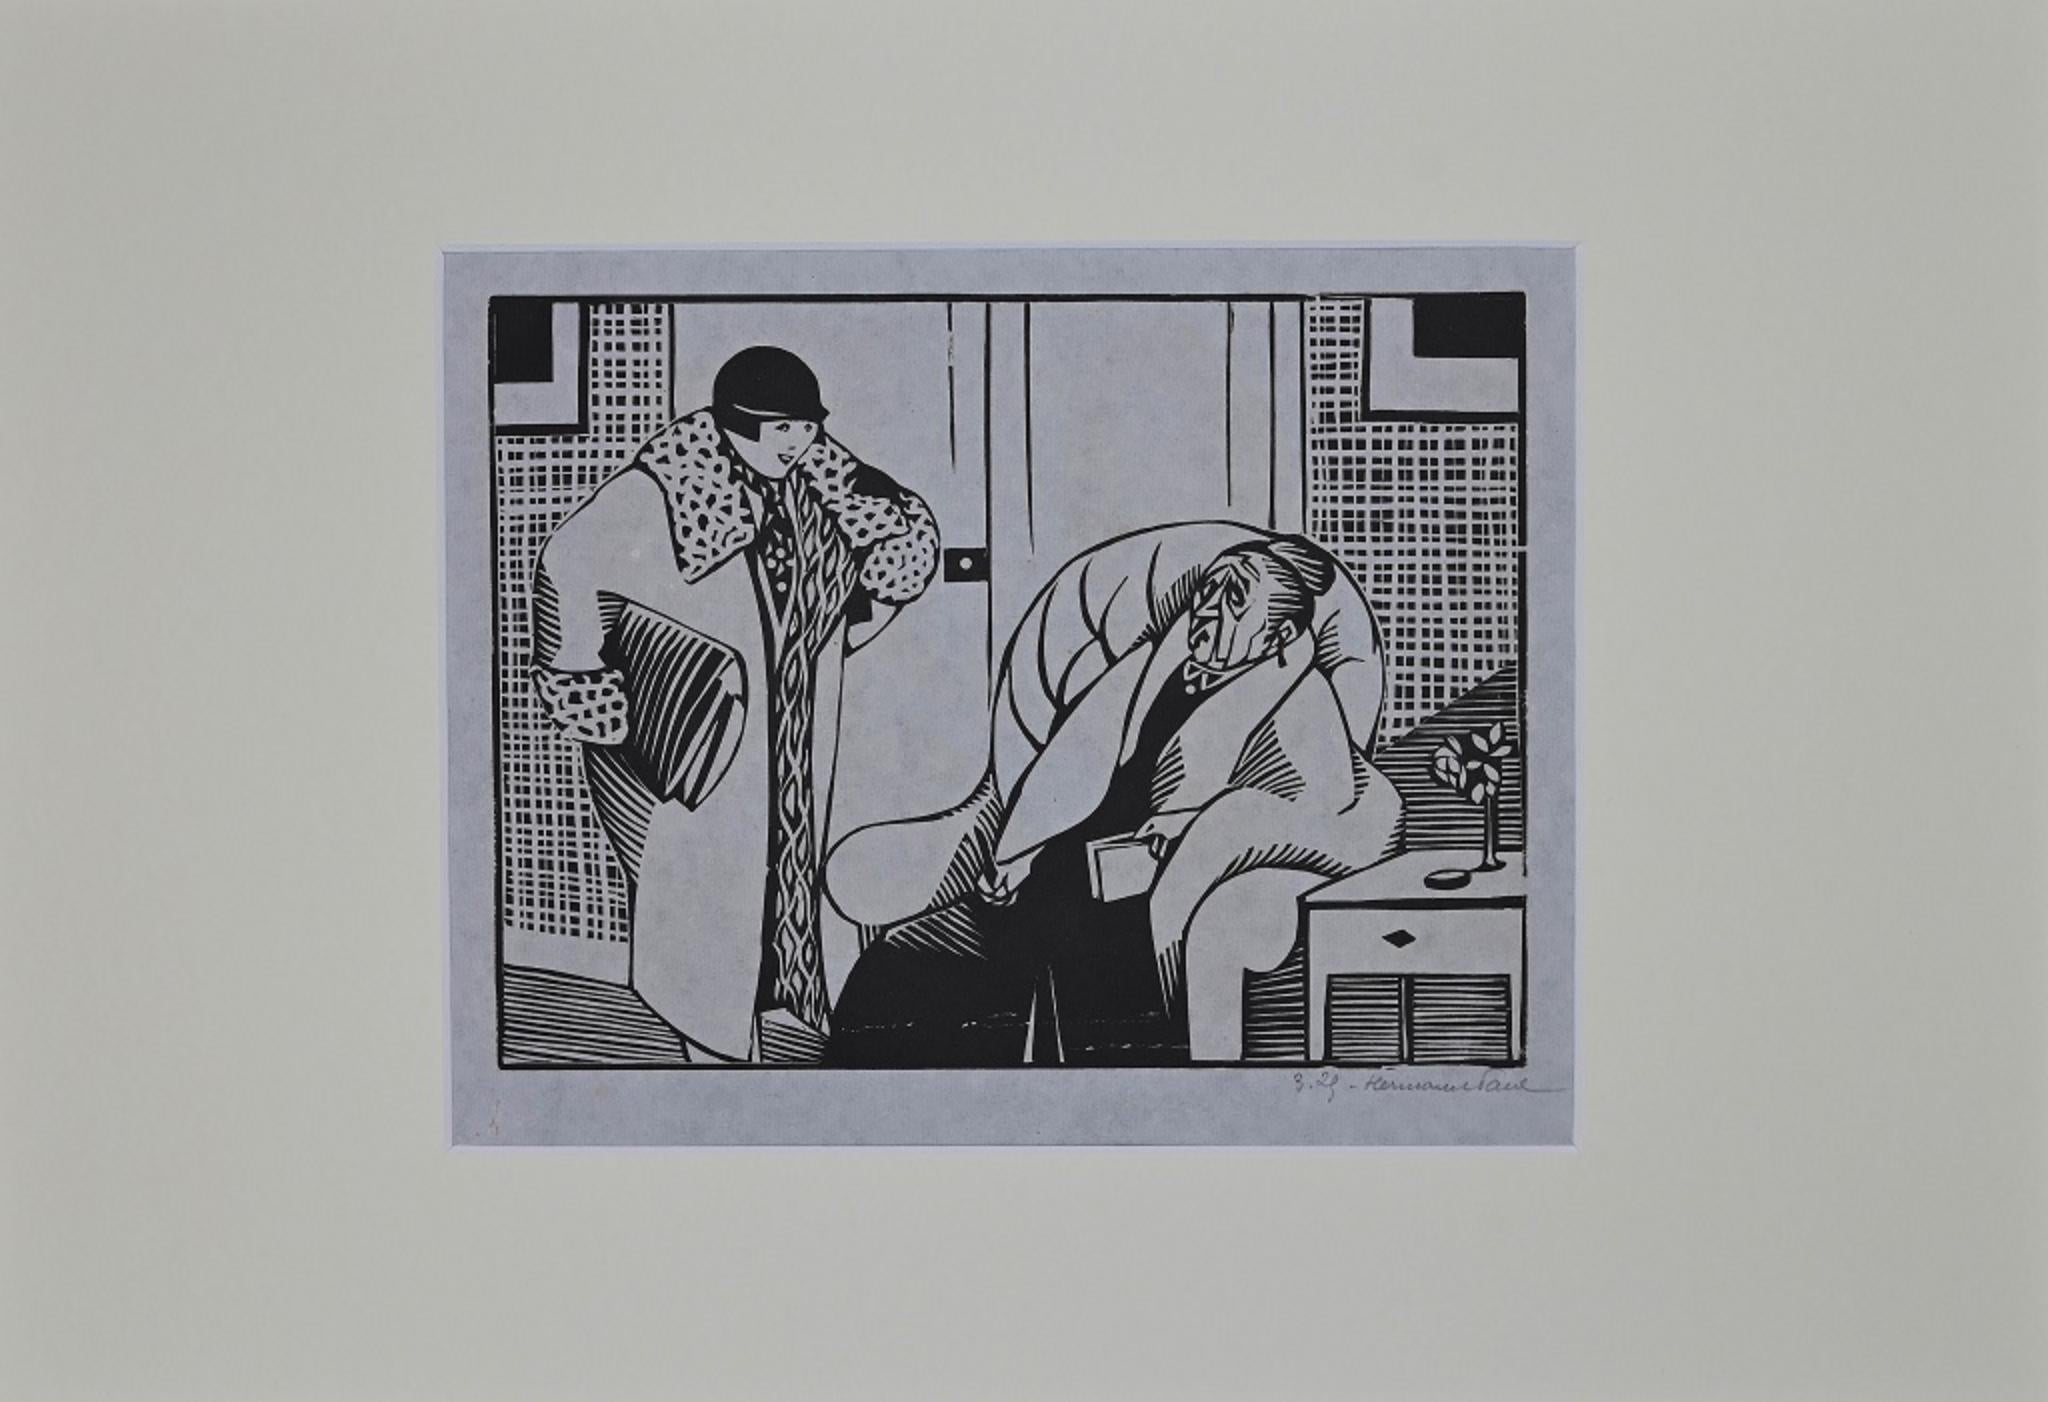 The Old Woman is an original Modern artwork realized by Hermann-Paul (Paris,1864 – 1940).

Original woodcut print on paper. 

Hand-signed in pencil on the lower right corner.

Passepartout is included; dimensions: 34 x 49 cm.

Mint